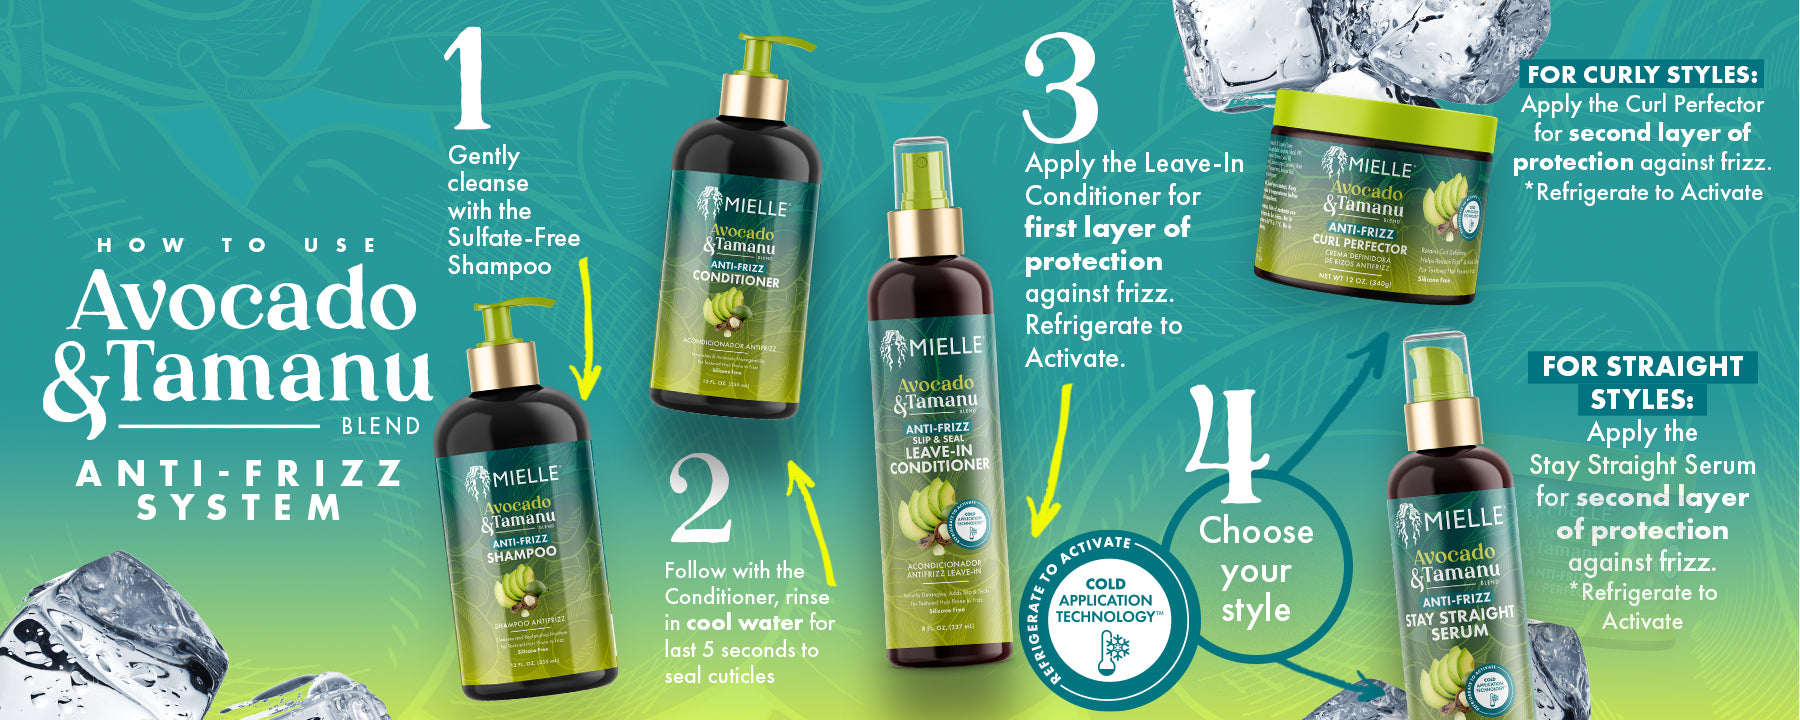 Image showing steps of using avocado and tamanu anti frizz system with number mentioned against each product to be used.